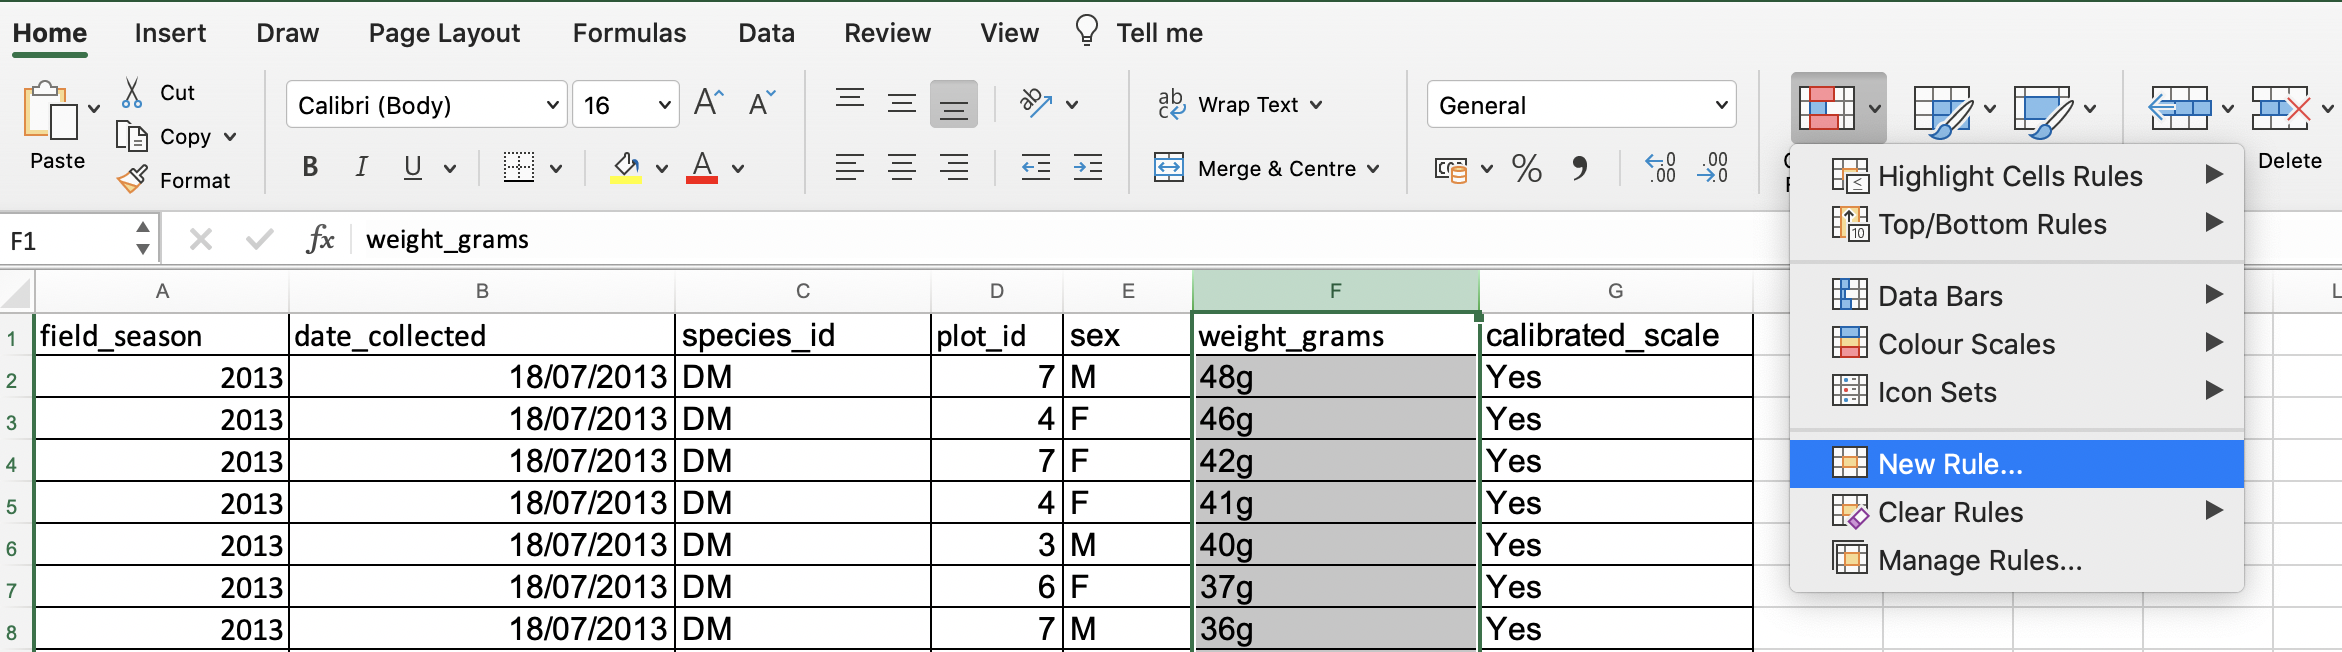 Image of Conditional Formatting - adding new rule